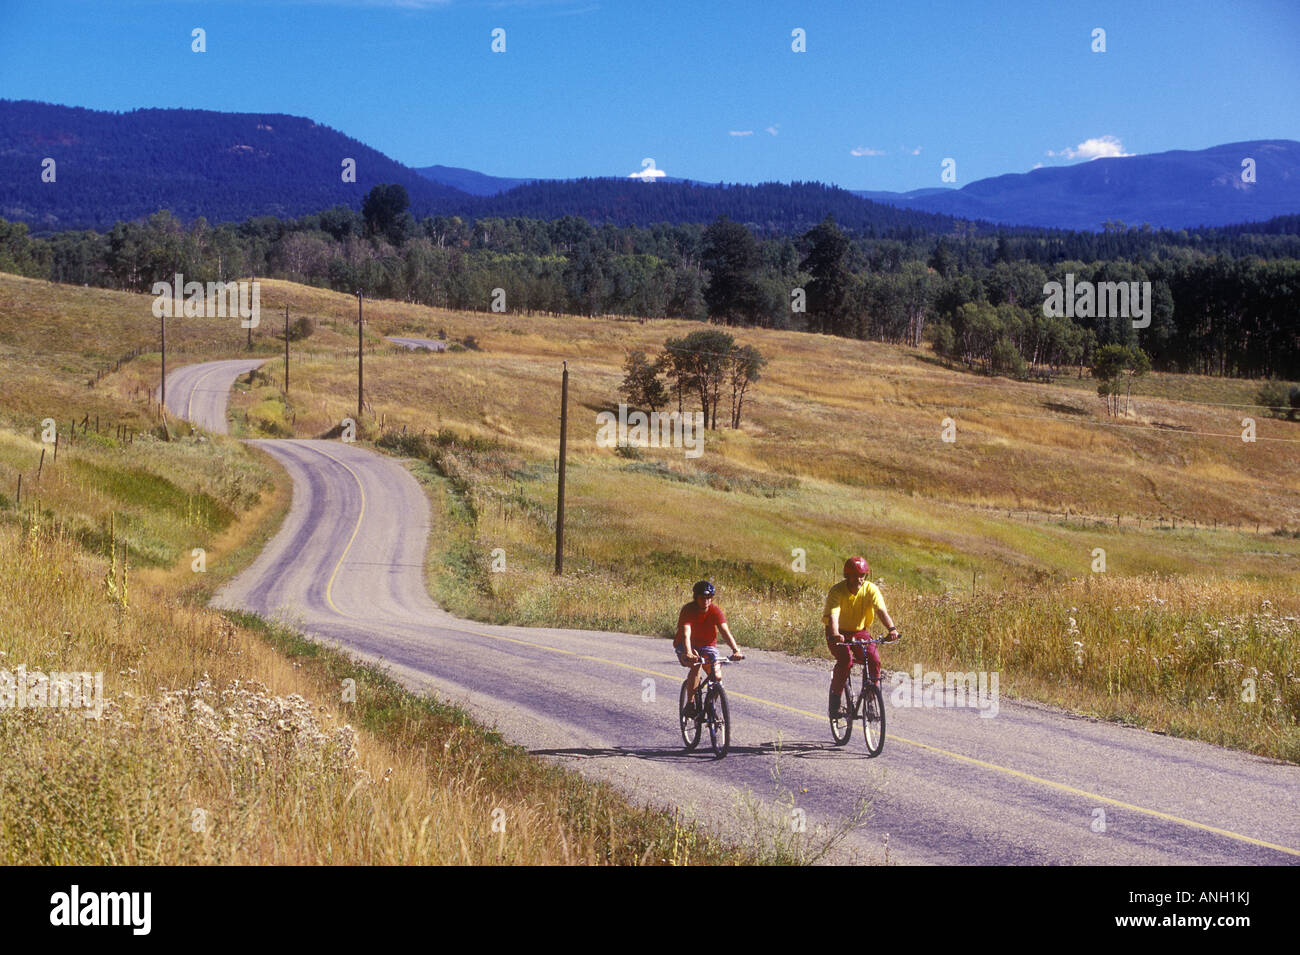 Cycling on back country road, Shuswap region, British Columbia, Canada. Stock Photo